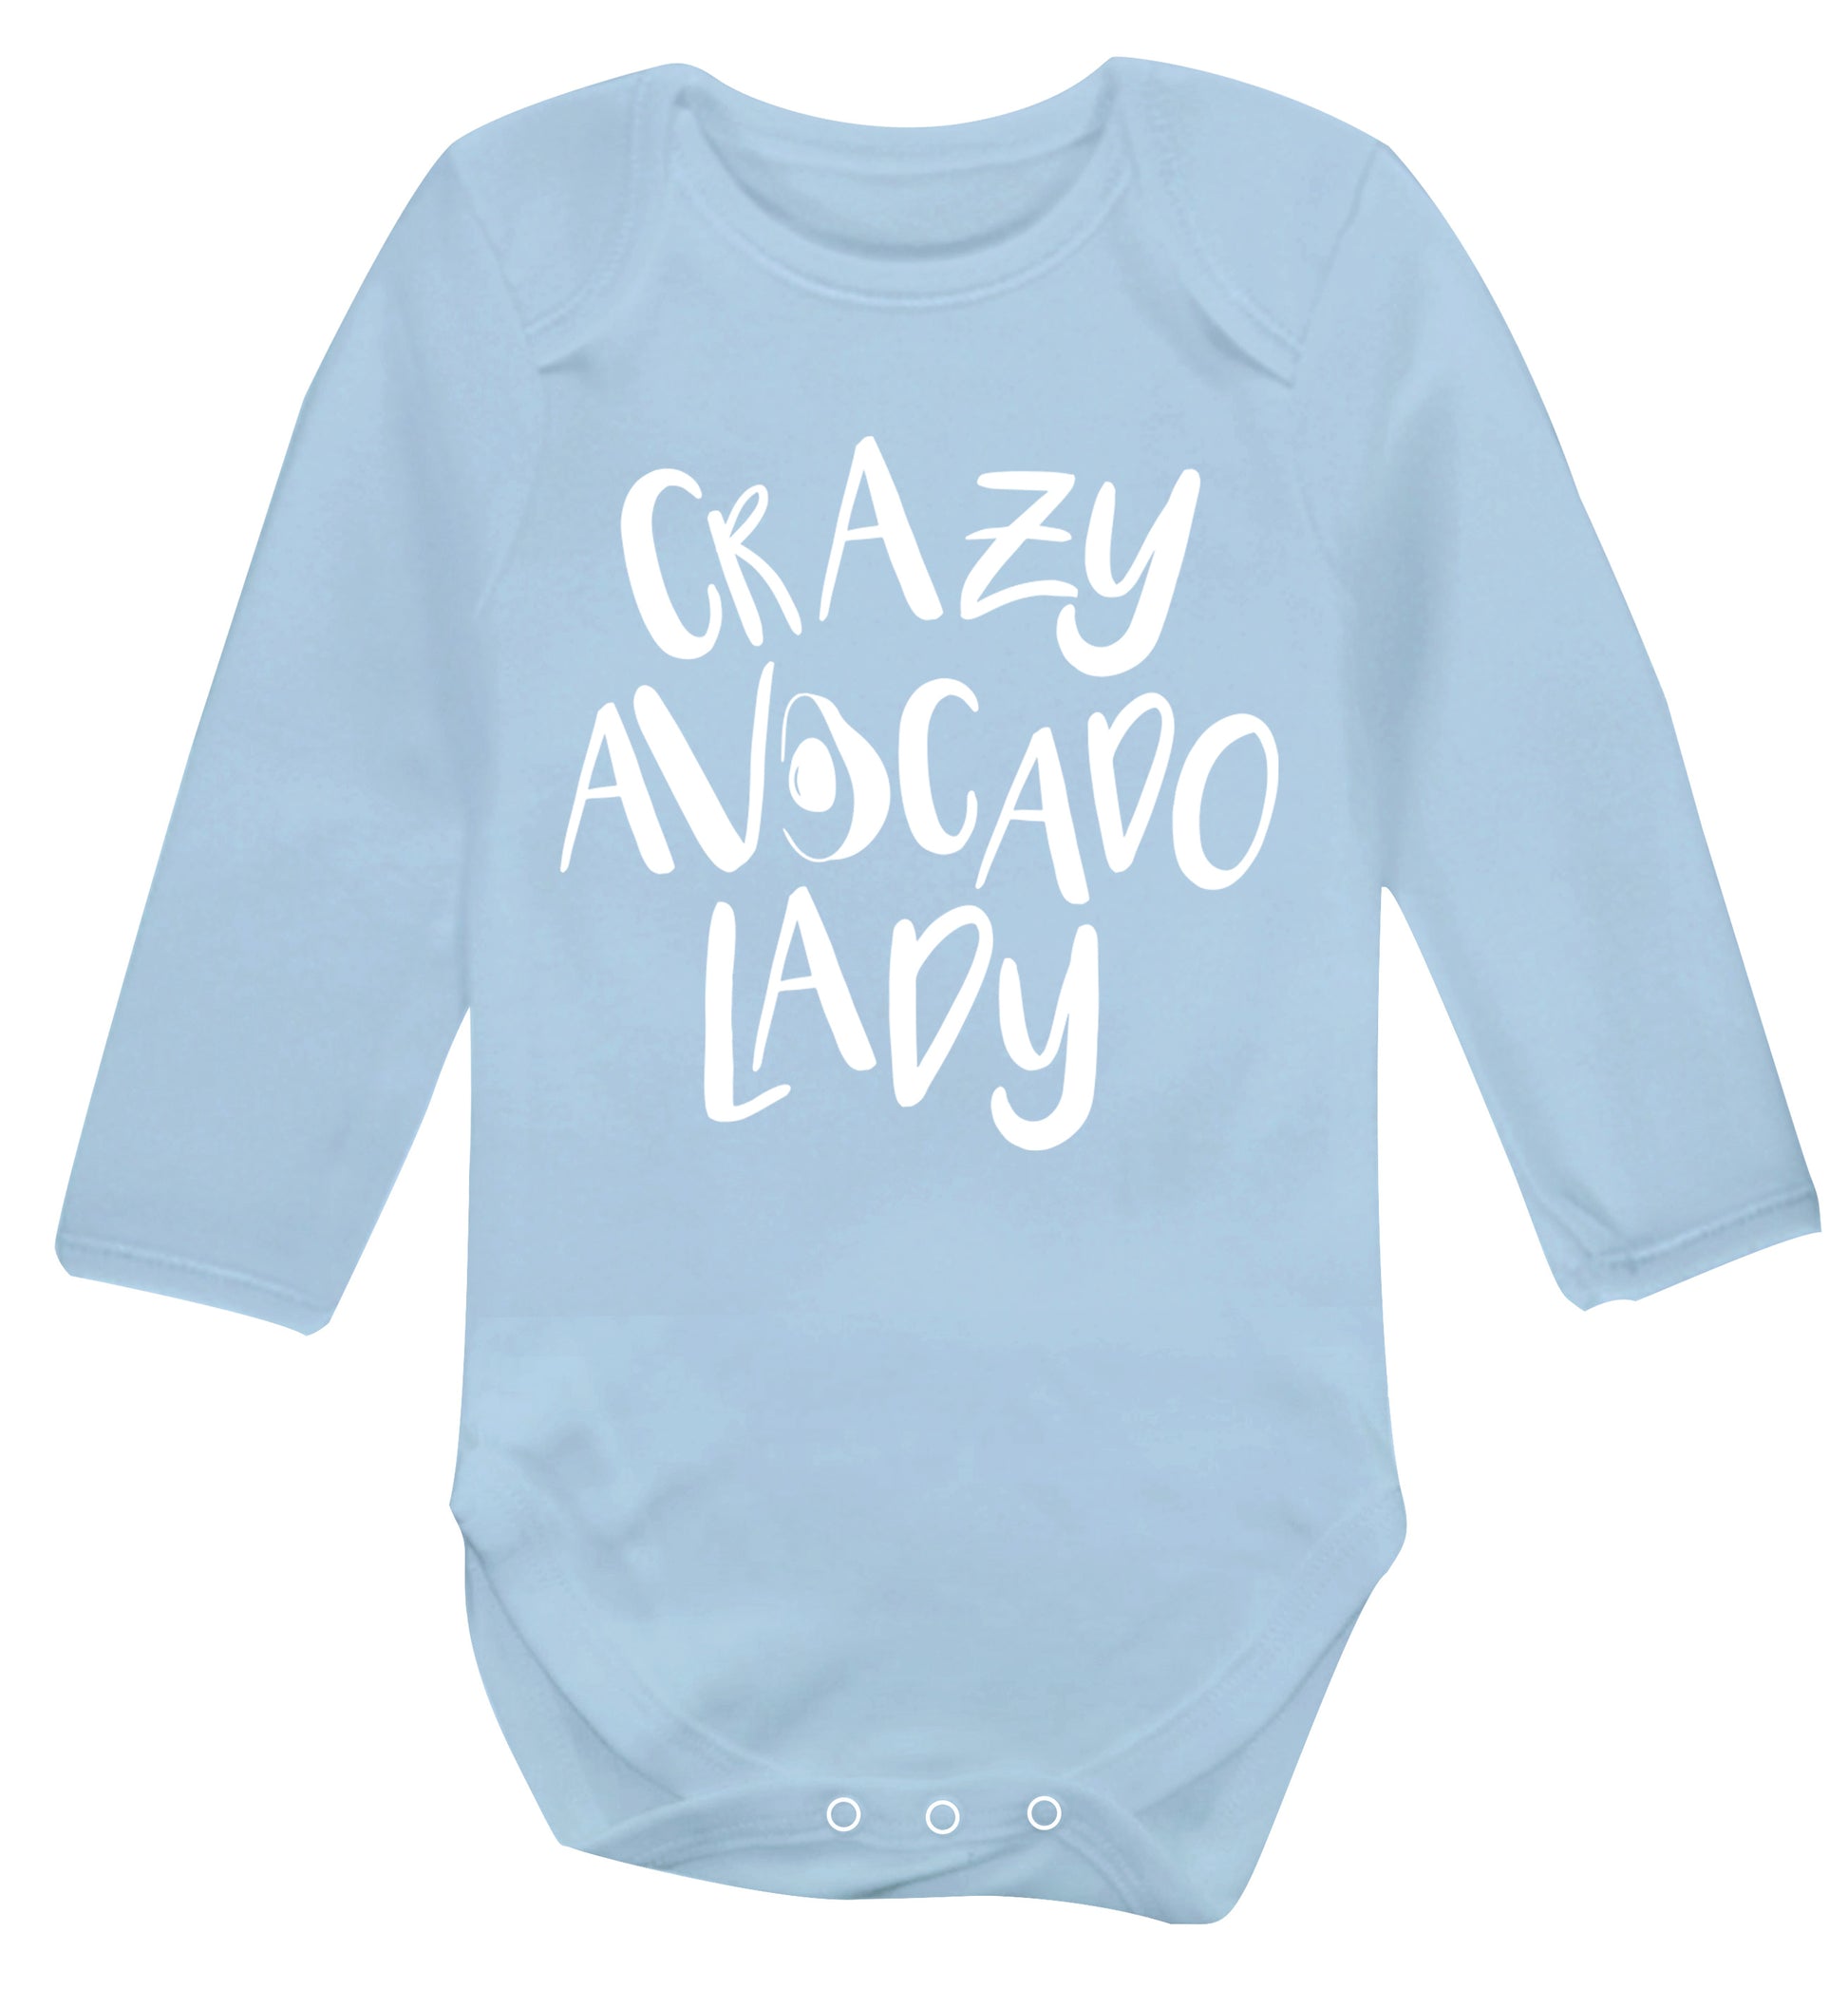 Crazy avocado lady Baby Vest long sleeved pale blue 6-12 months